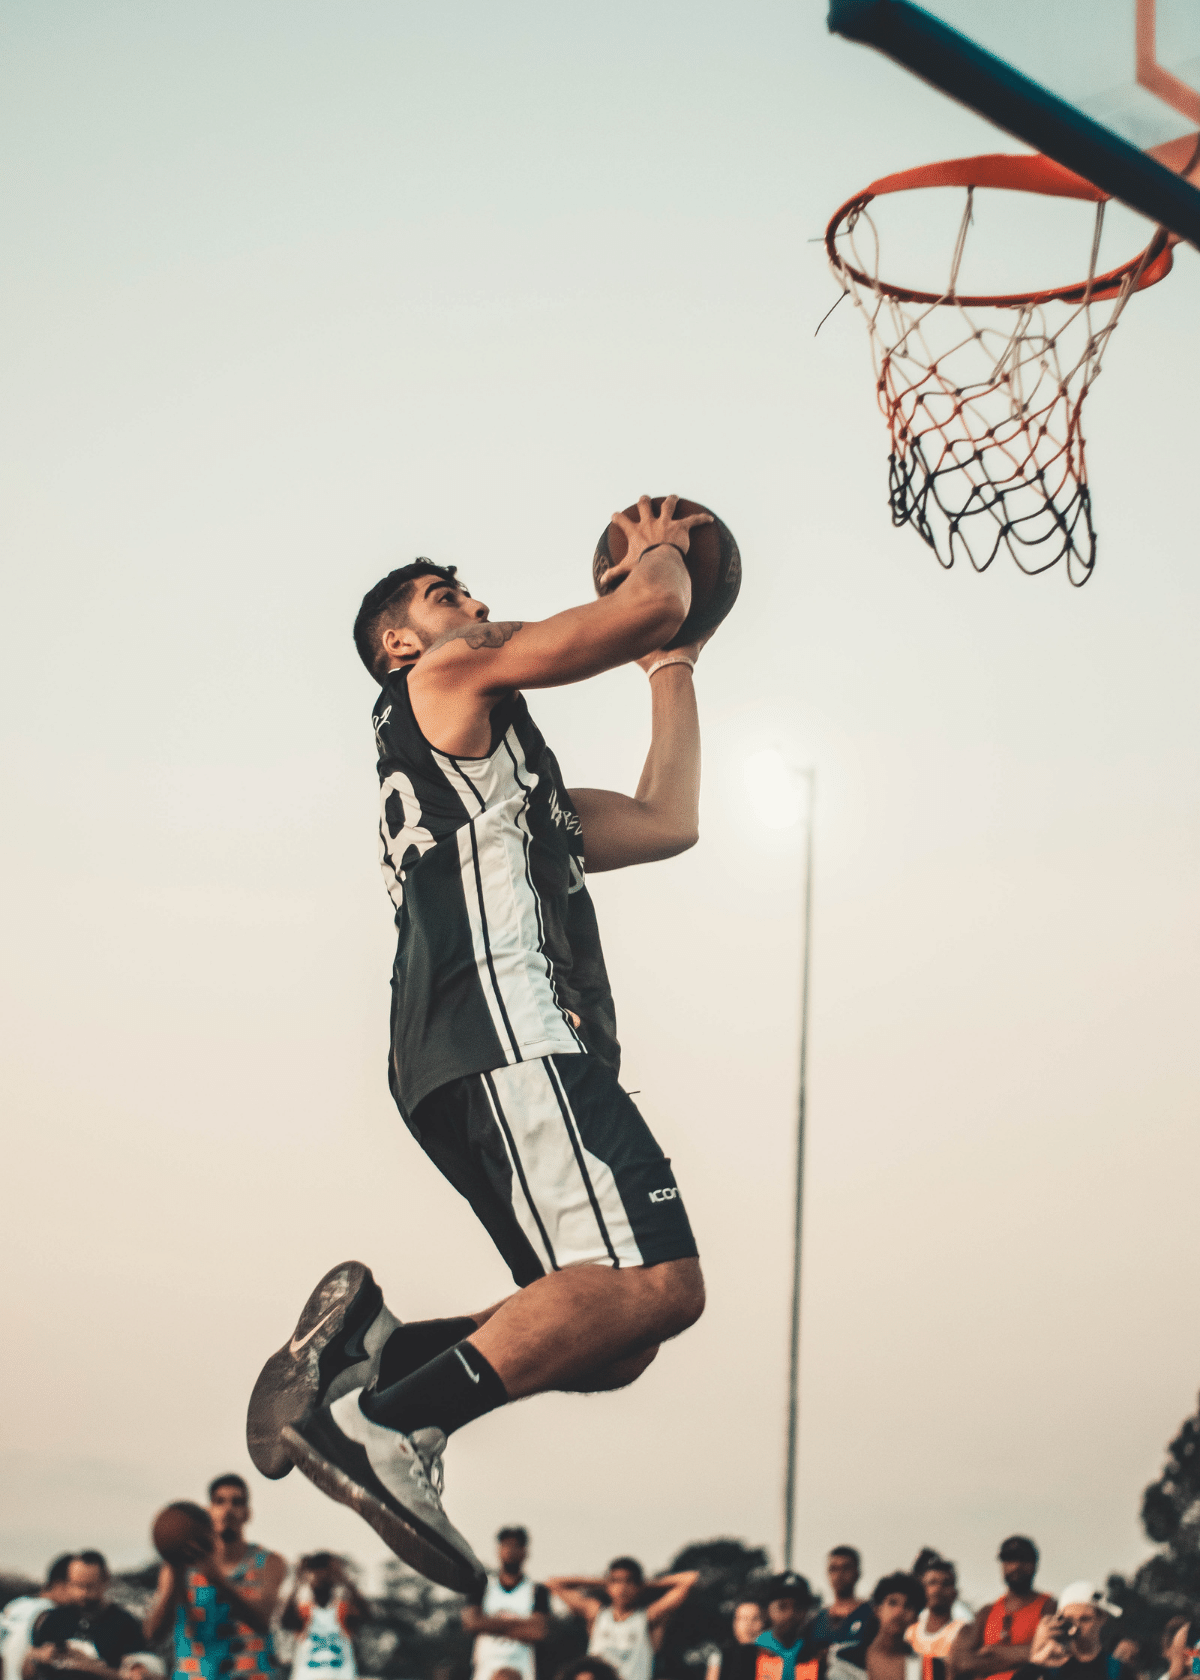 The Best Basketball Shoes for Jumping Higher (The Ultimate List)